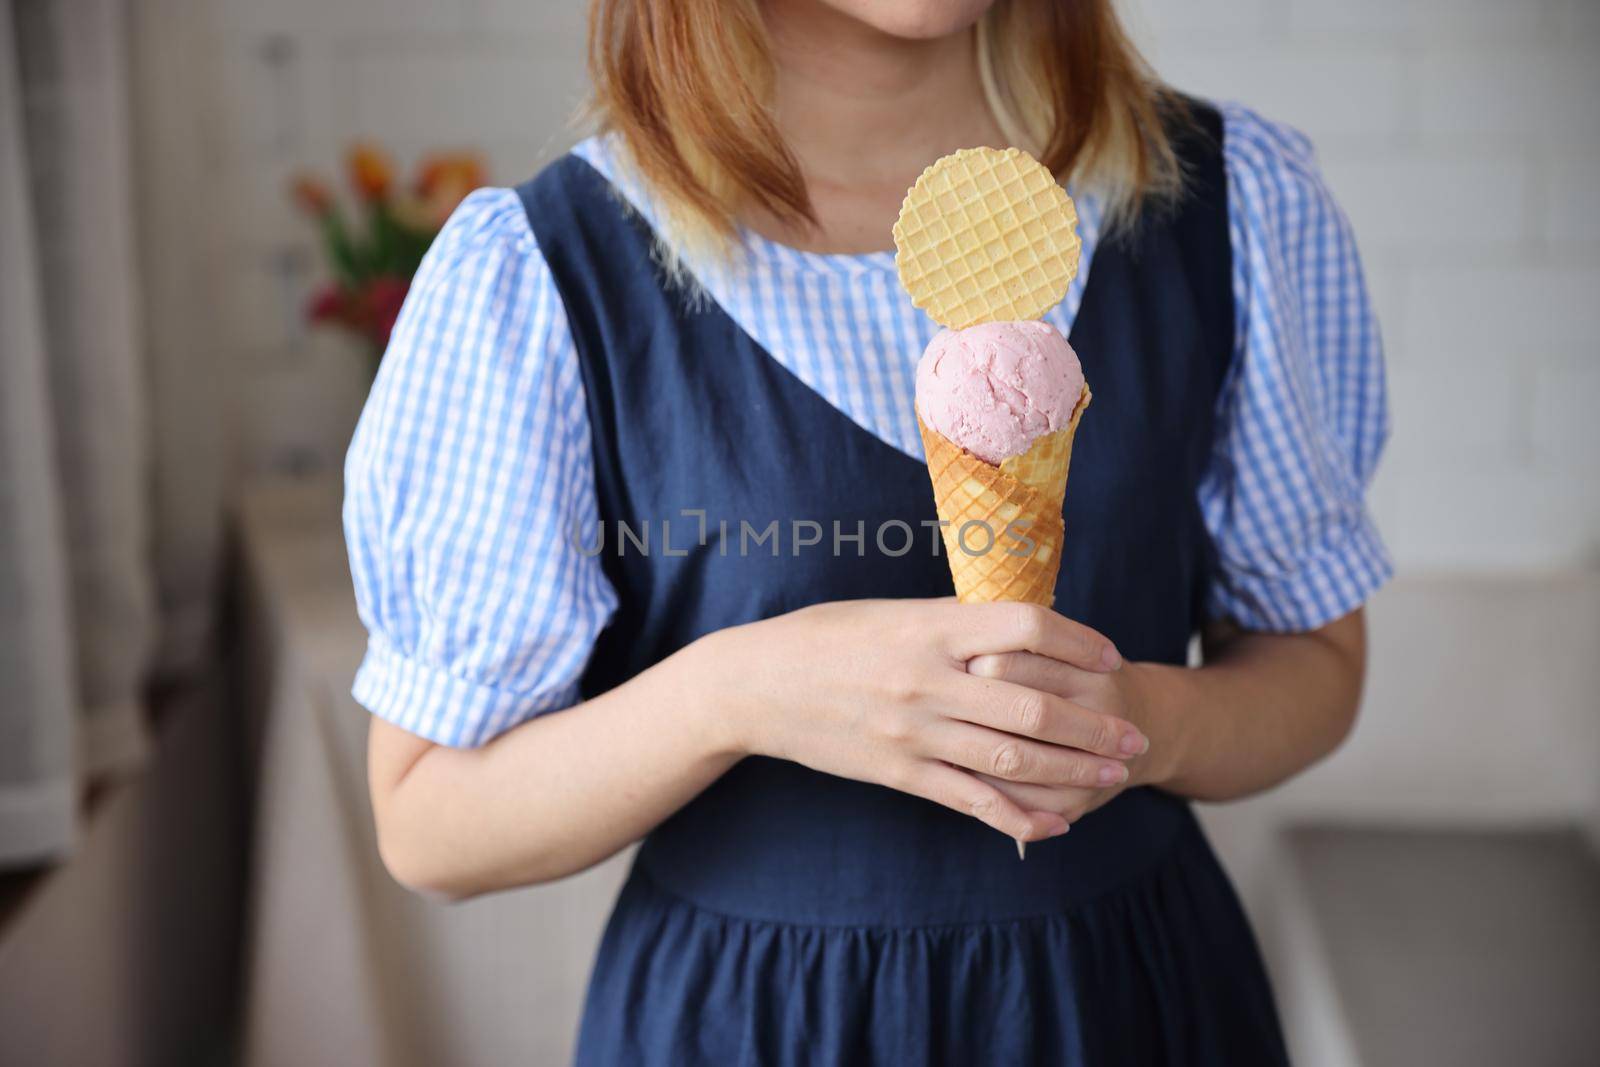 Young woman hand with holding ice cream cone